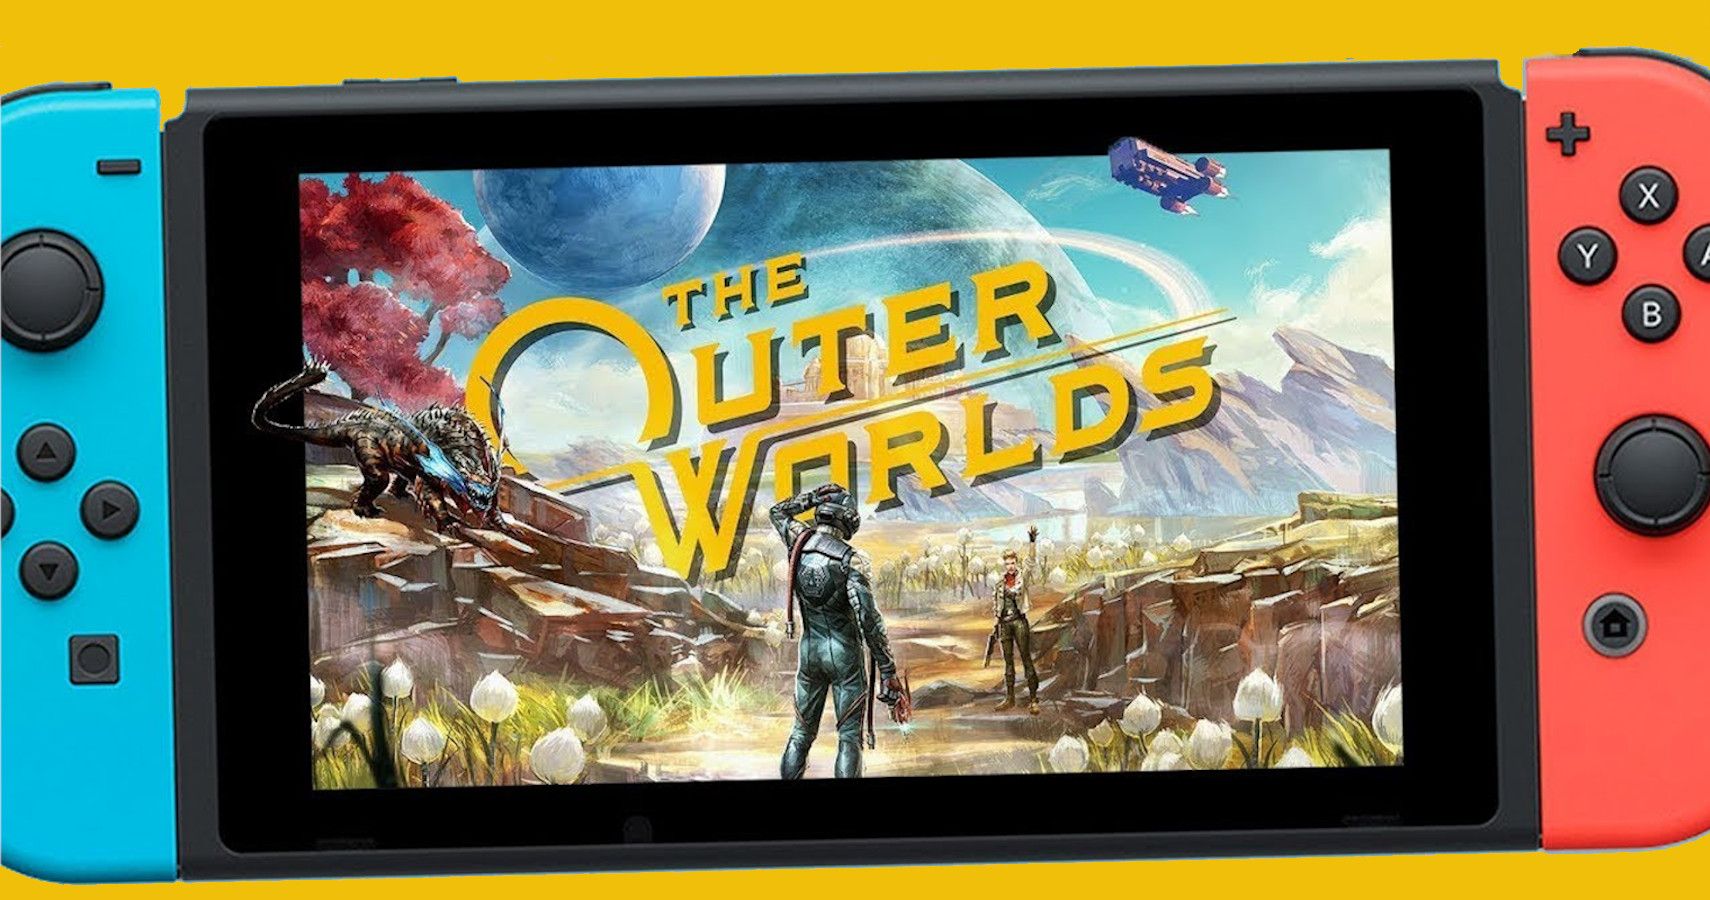 the outer worlds switch cartridge